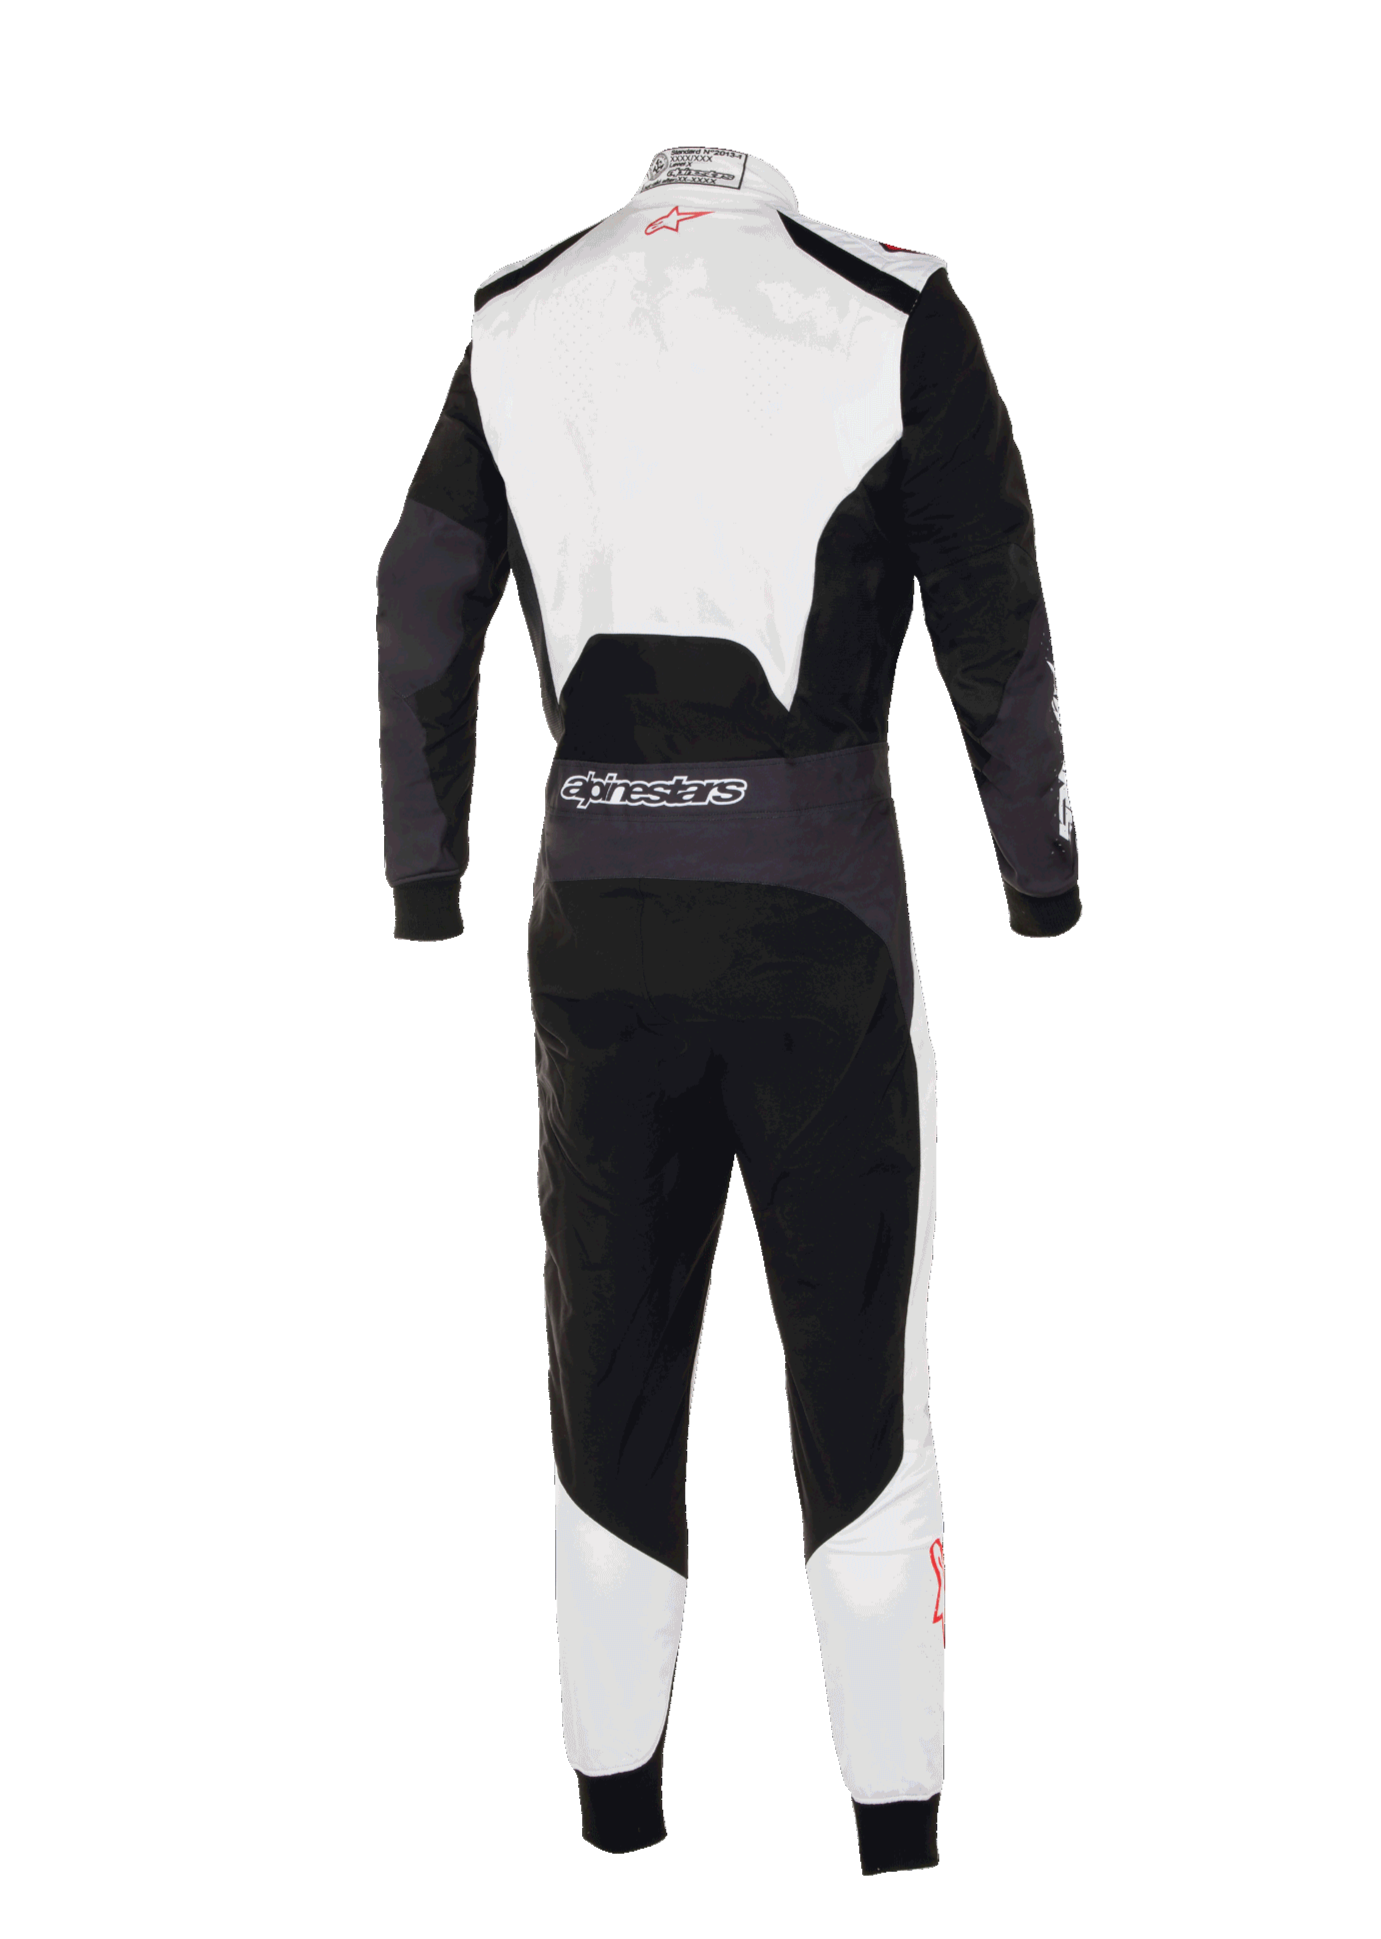 Karting Suits | Alpinestars® Official Site